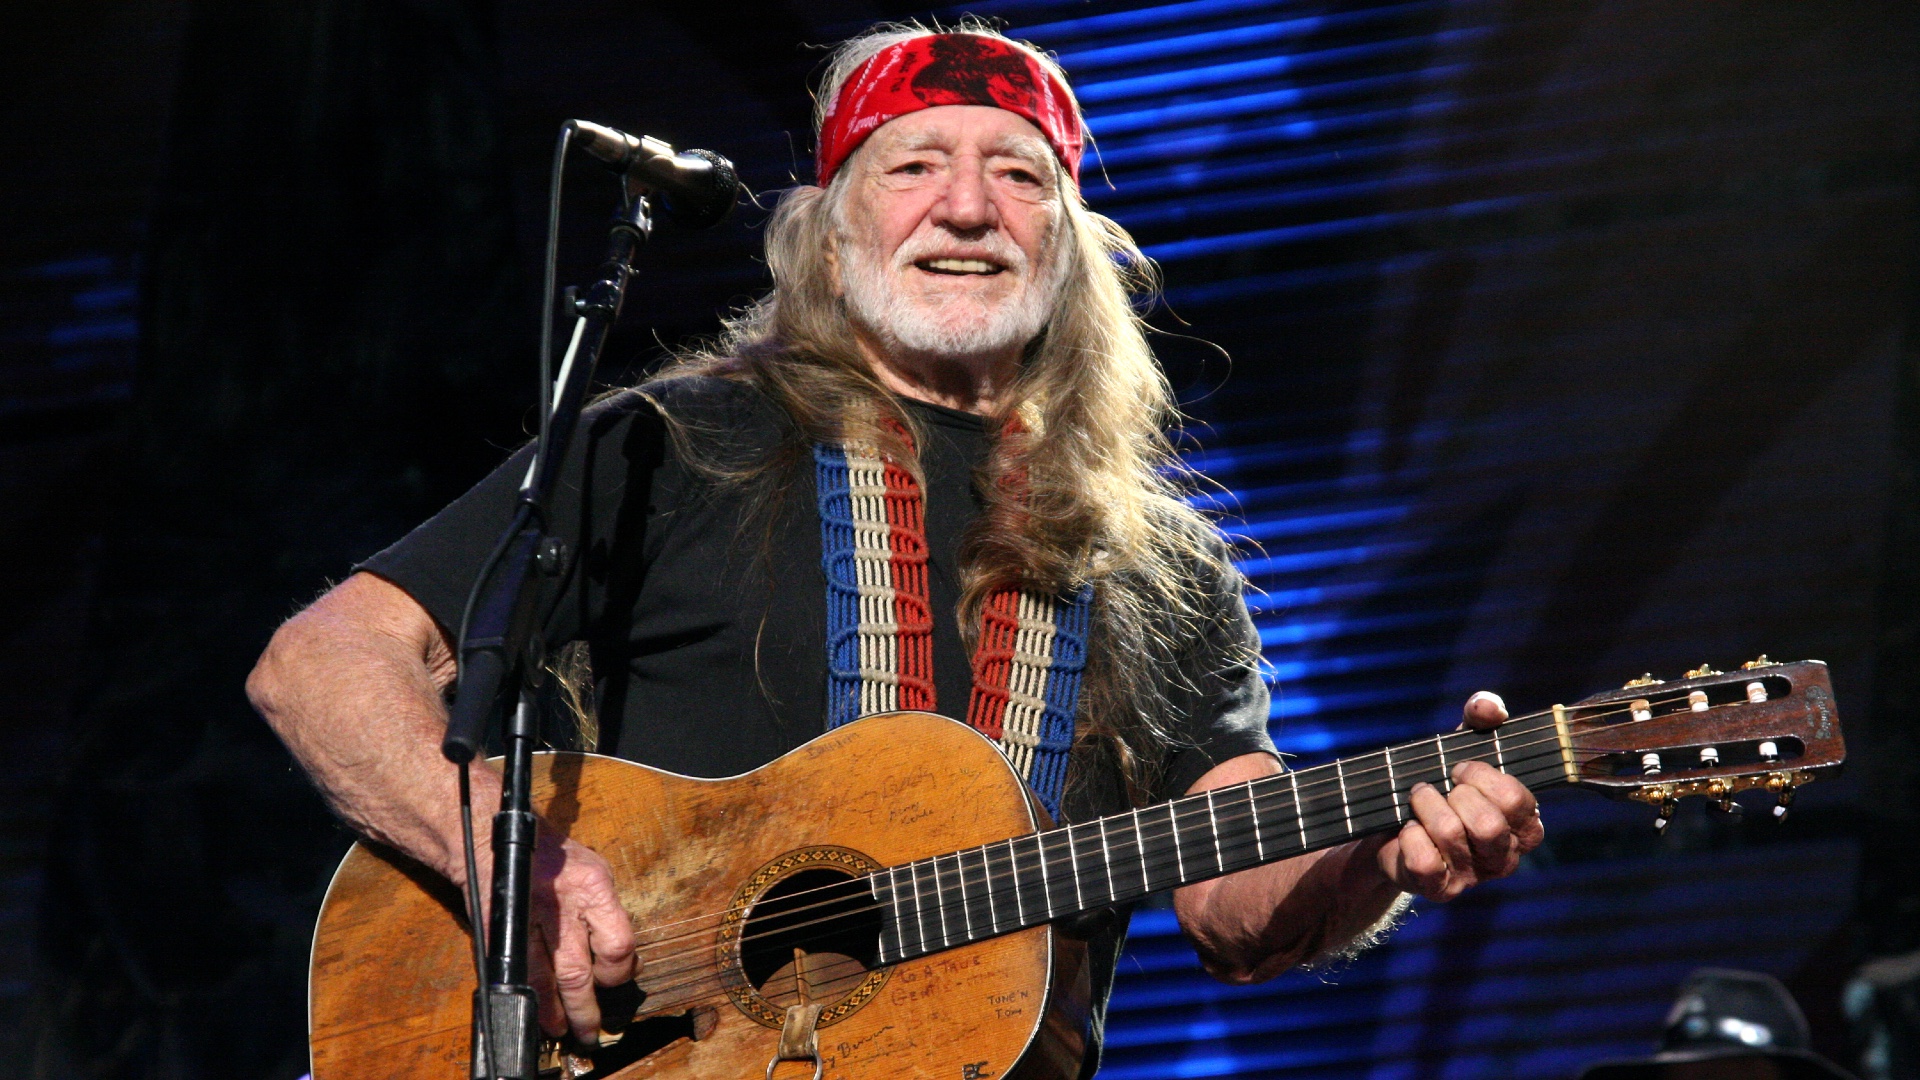 Willie Nelson To Celebrate 90th Birthday With Star-Studded Summer Concert Tour